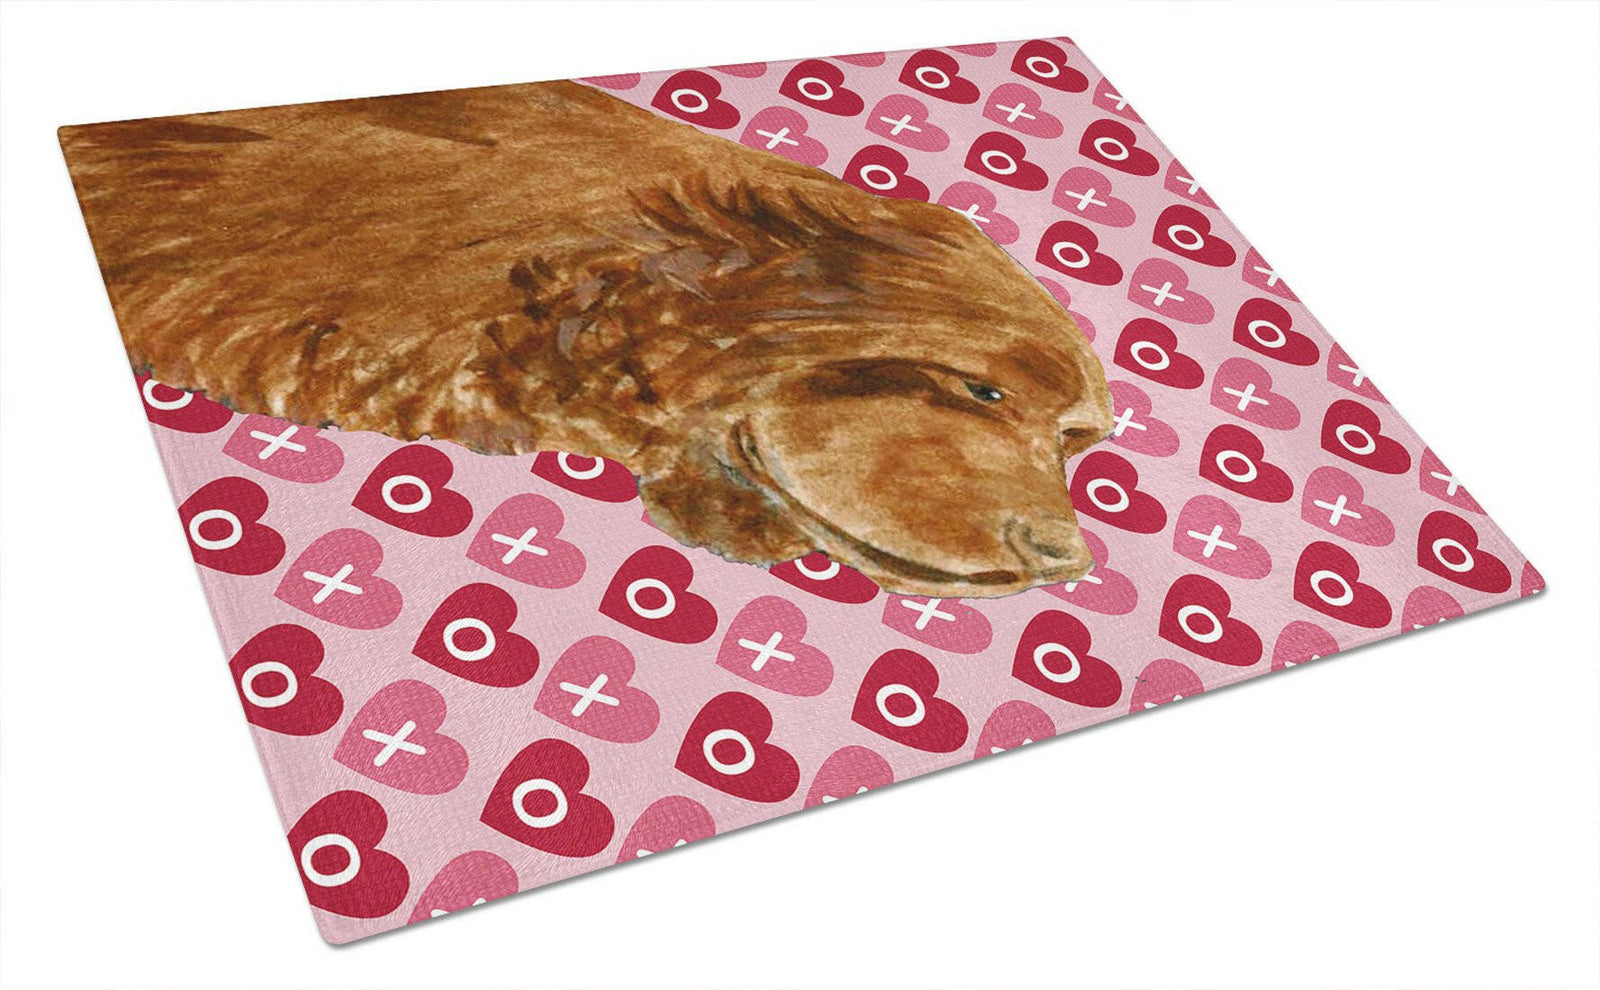 Sussex Spaniel Hearts Love and Valentine's Day Glass Cutting Board Large by Caroline's Treasures